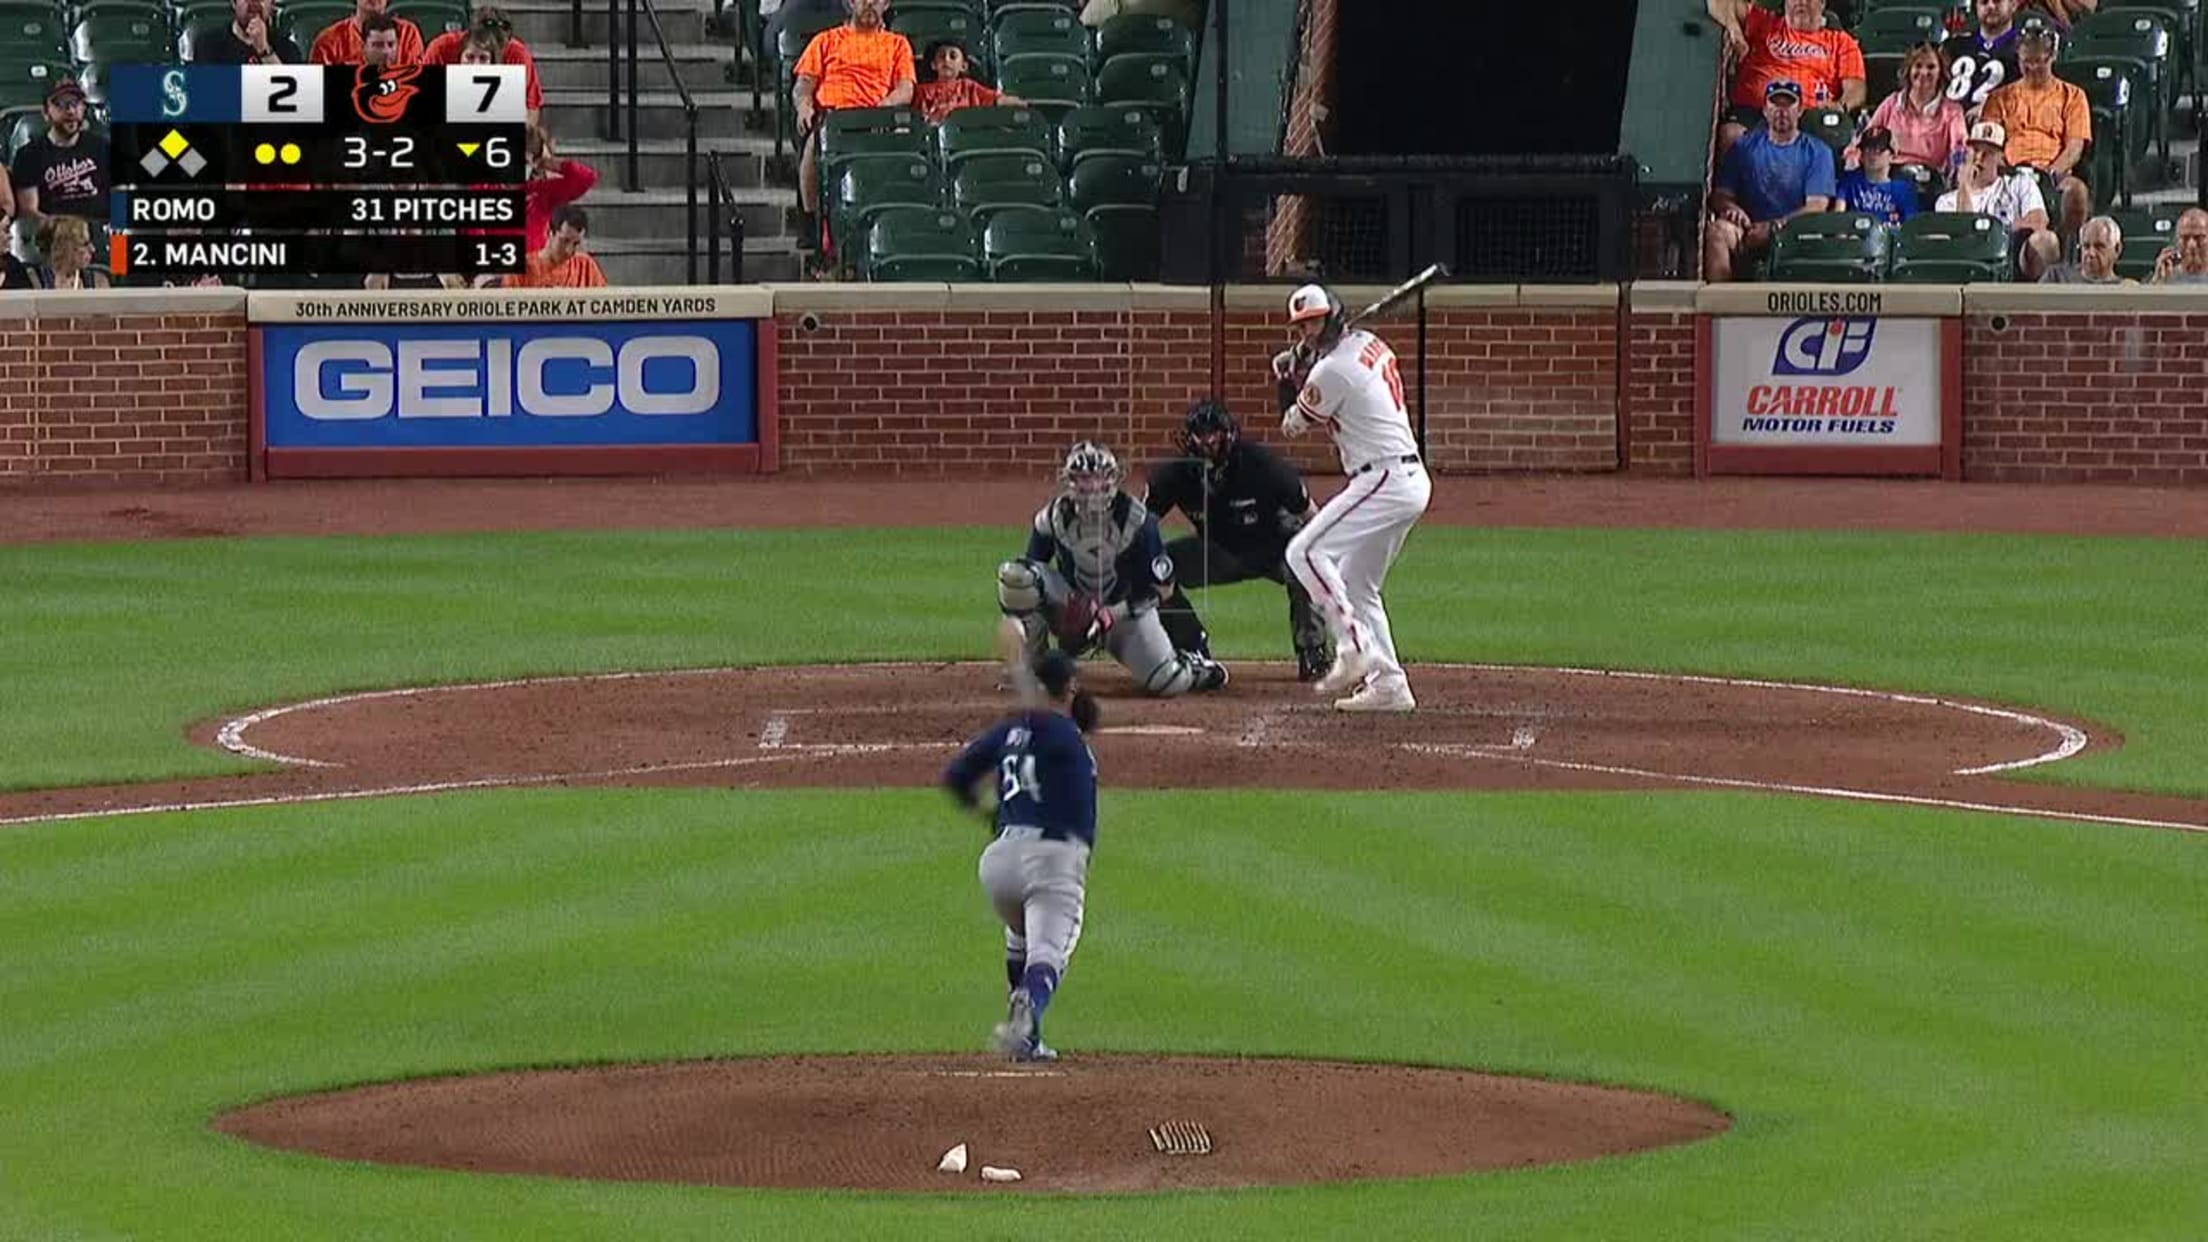 MLB Network - Trey Mancini is hitting .352 with a .471 OBP